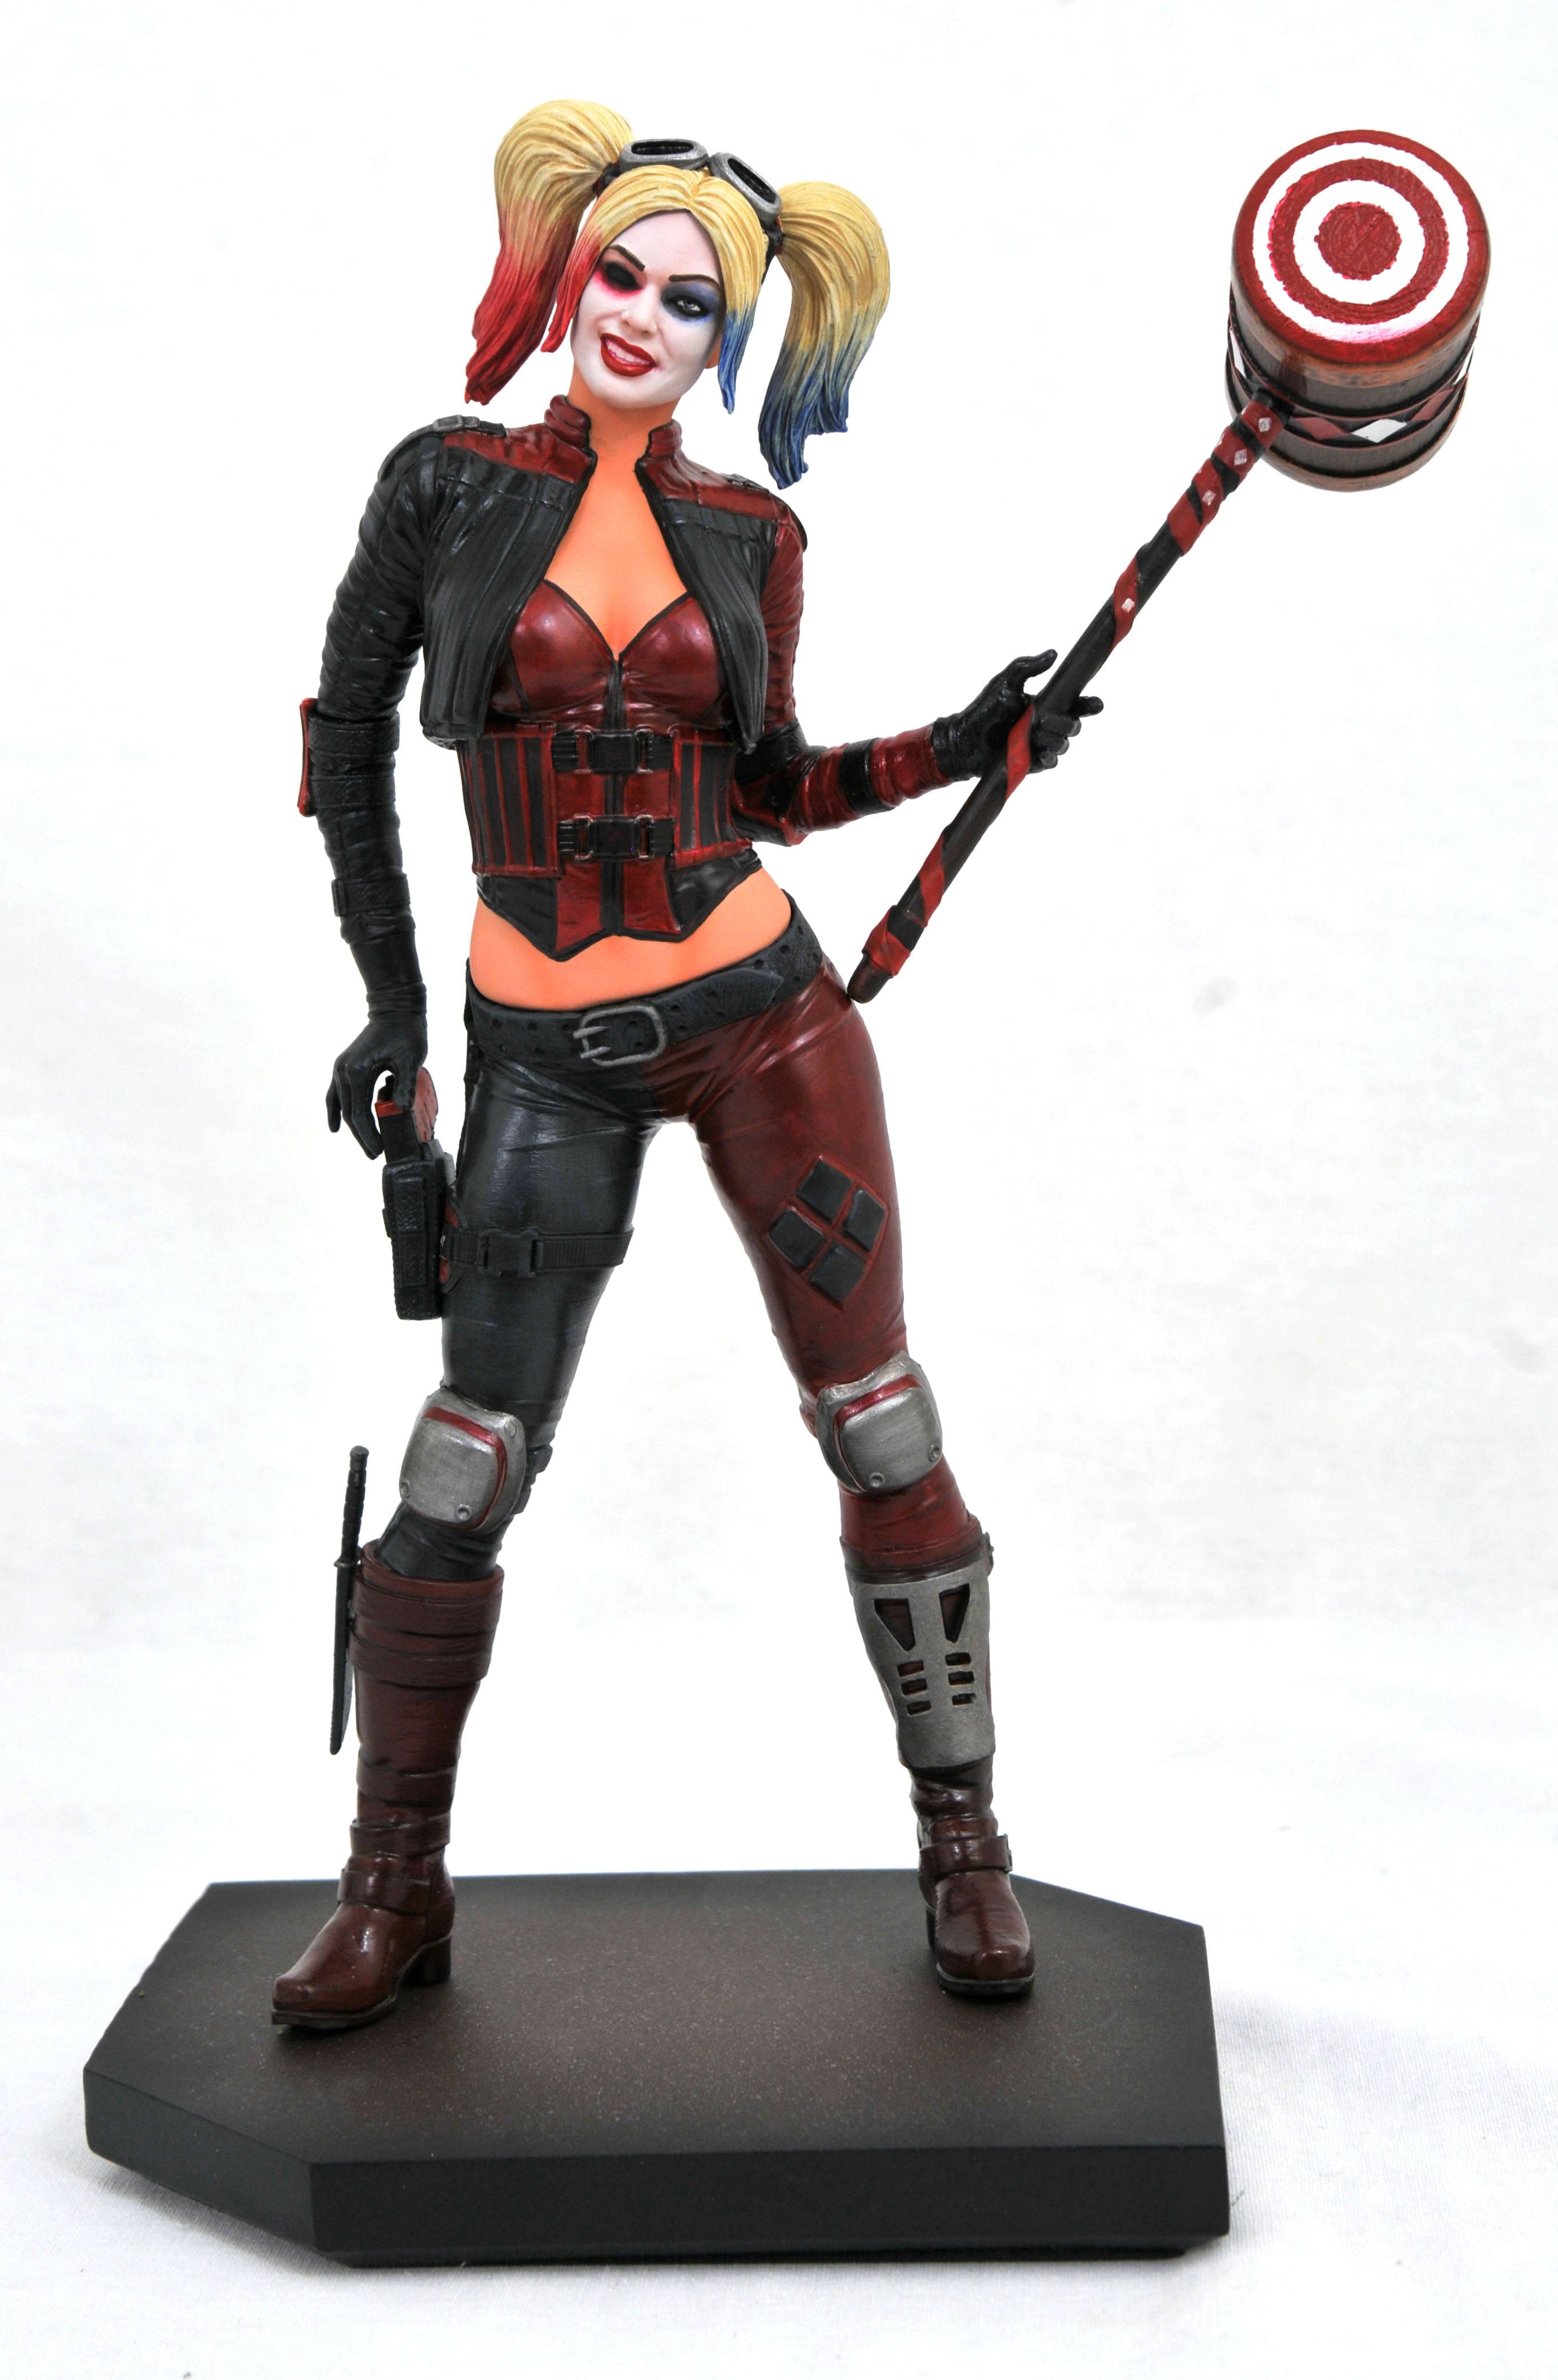 DC GALLERY INJUSTICE 2 HARLEY QUINN PVC STATUE